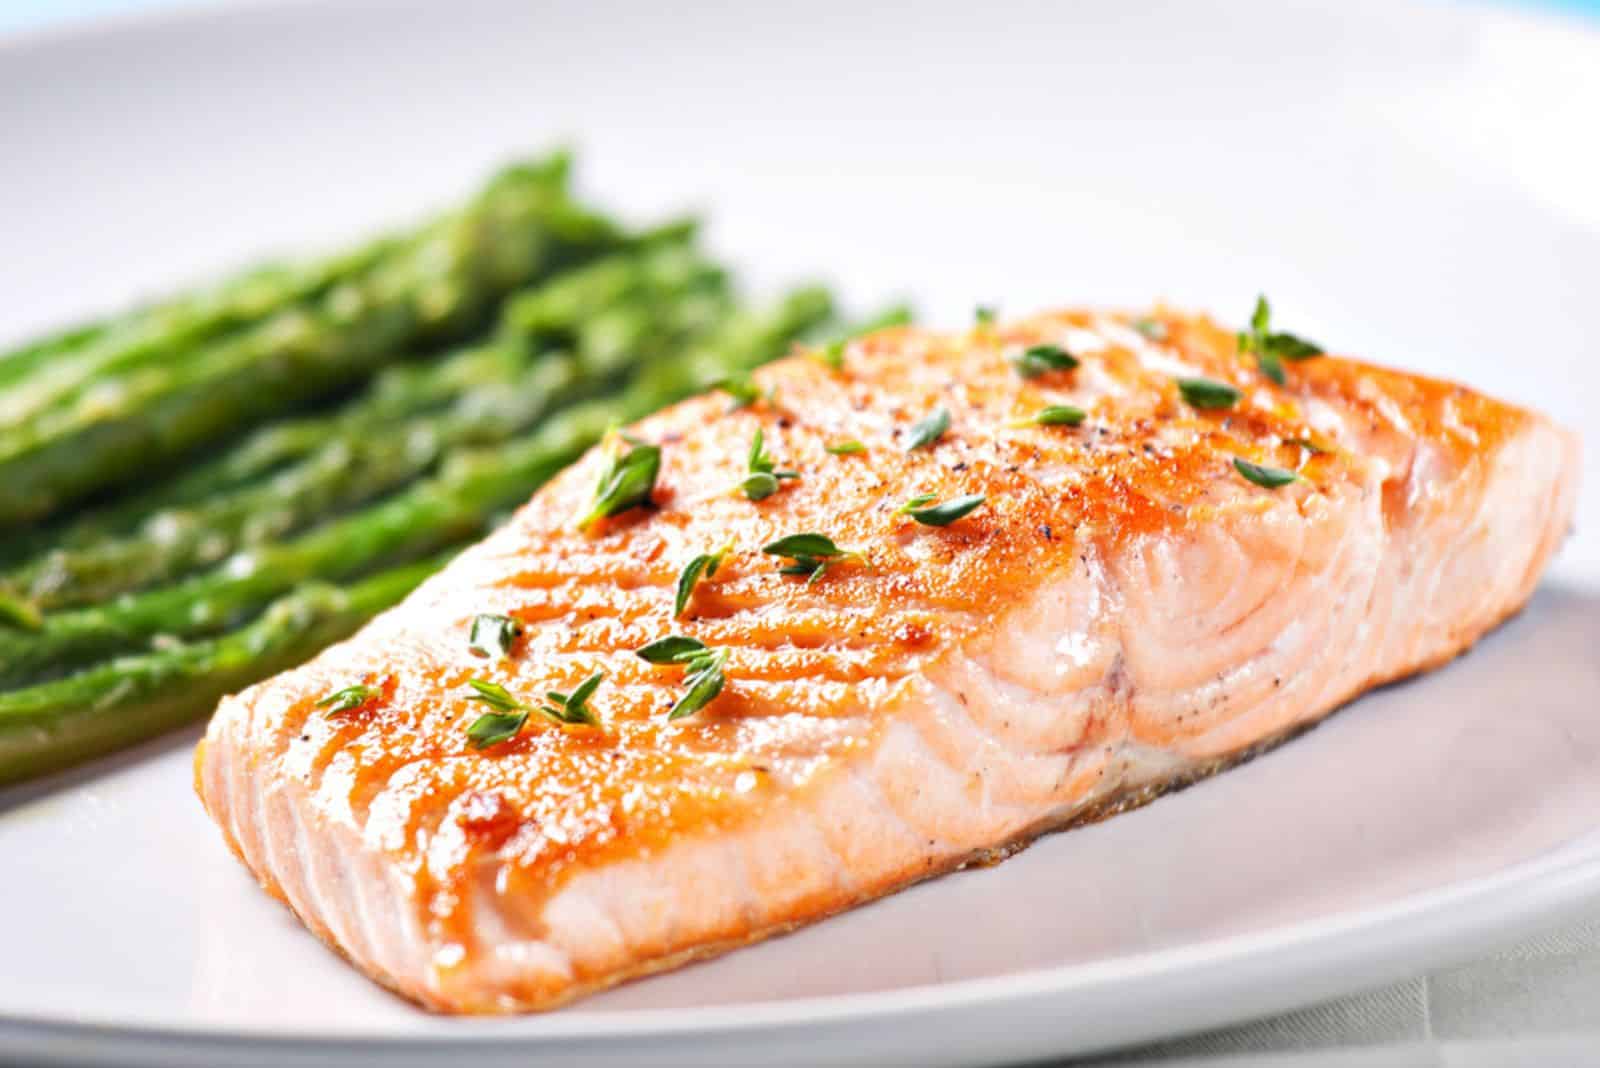 Fillet of salmon with asparagus
